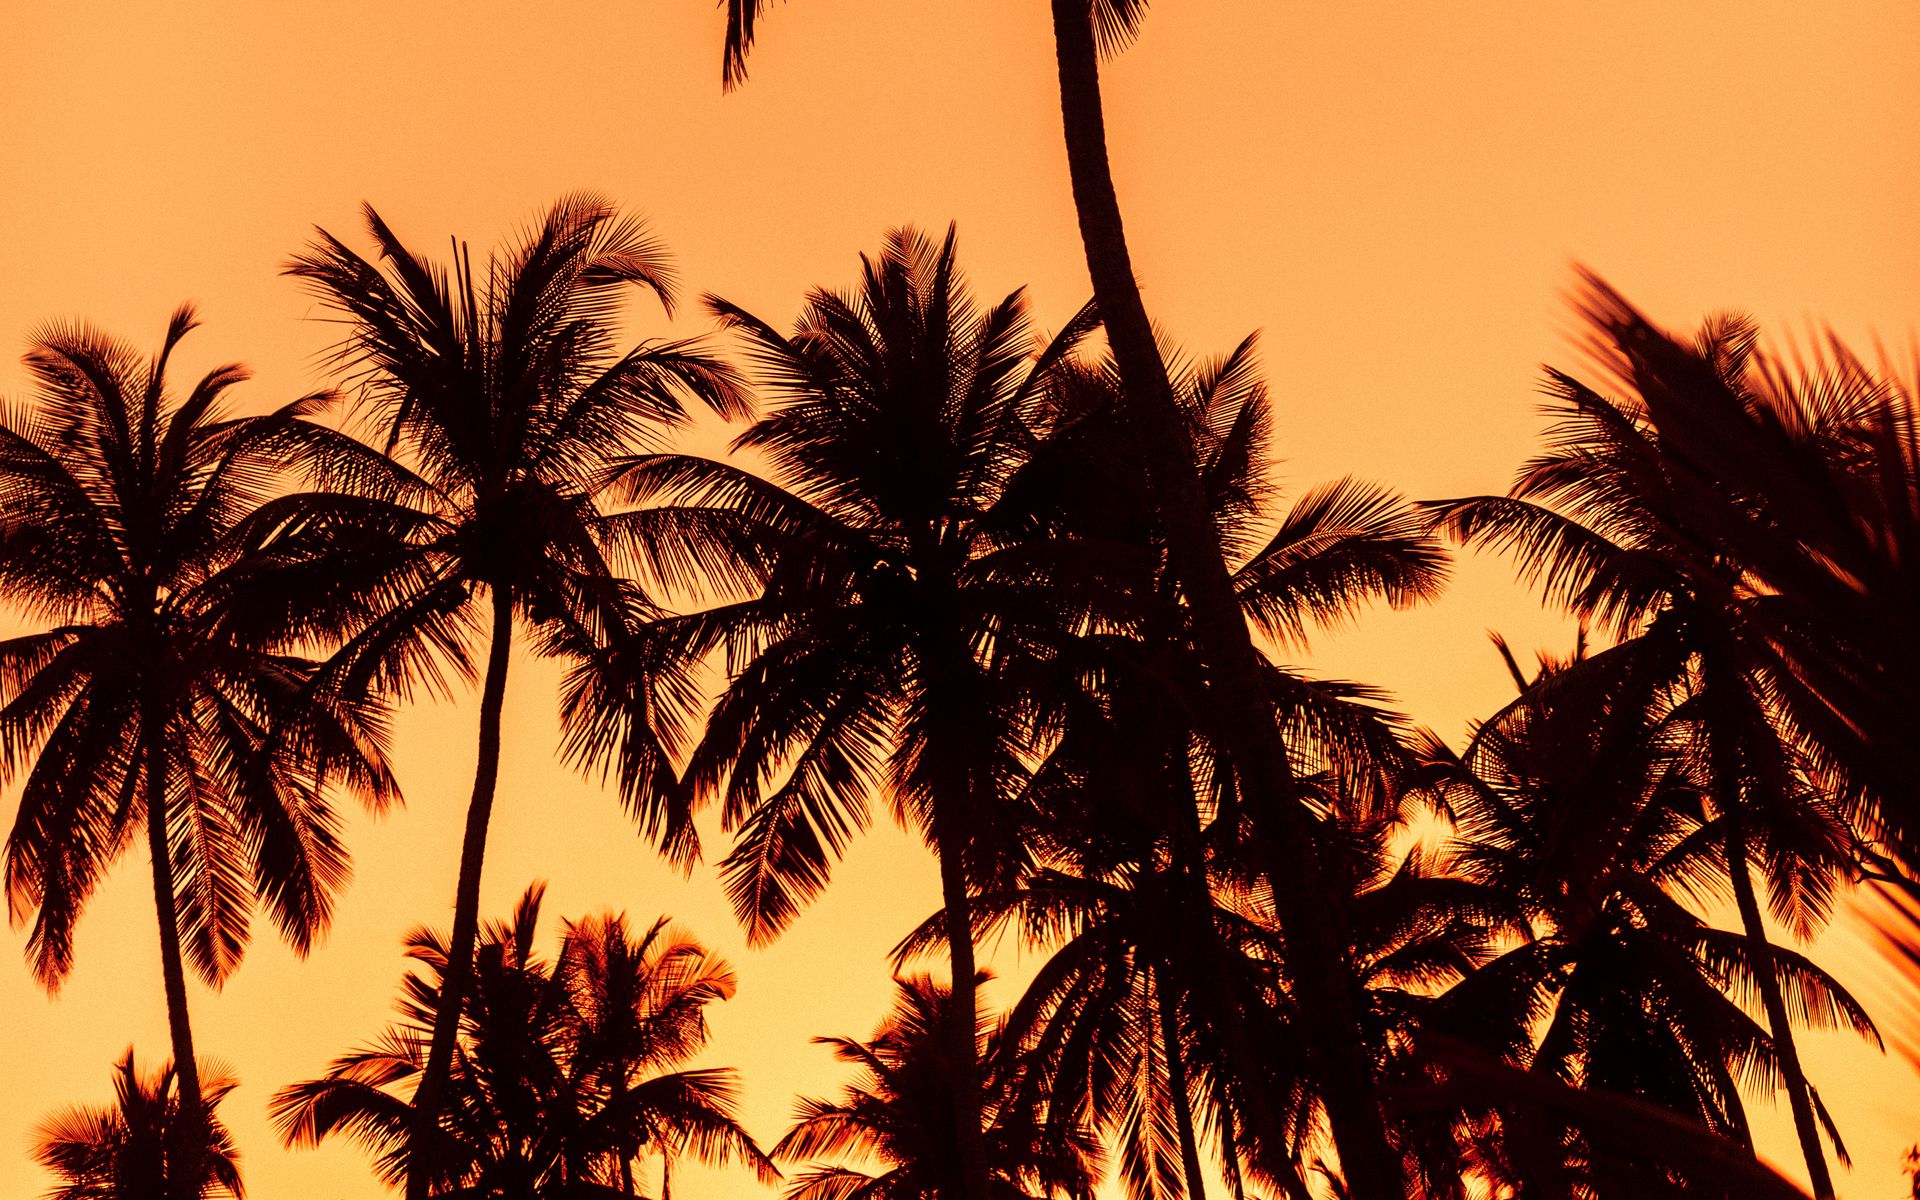 Download wallpaper 1920x1200 palms, sunset, trees, leaves, silhouettes ...